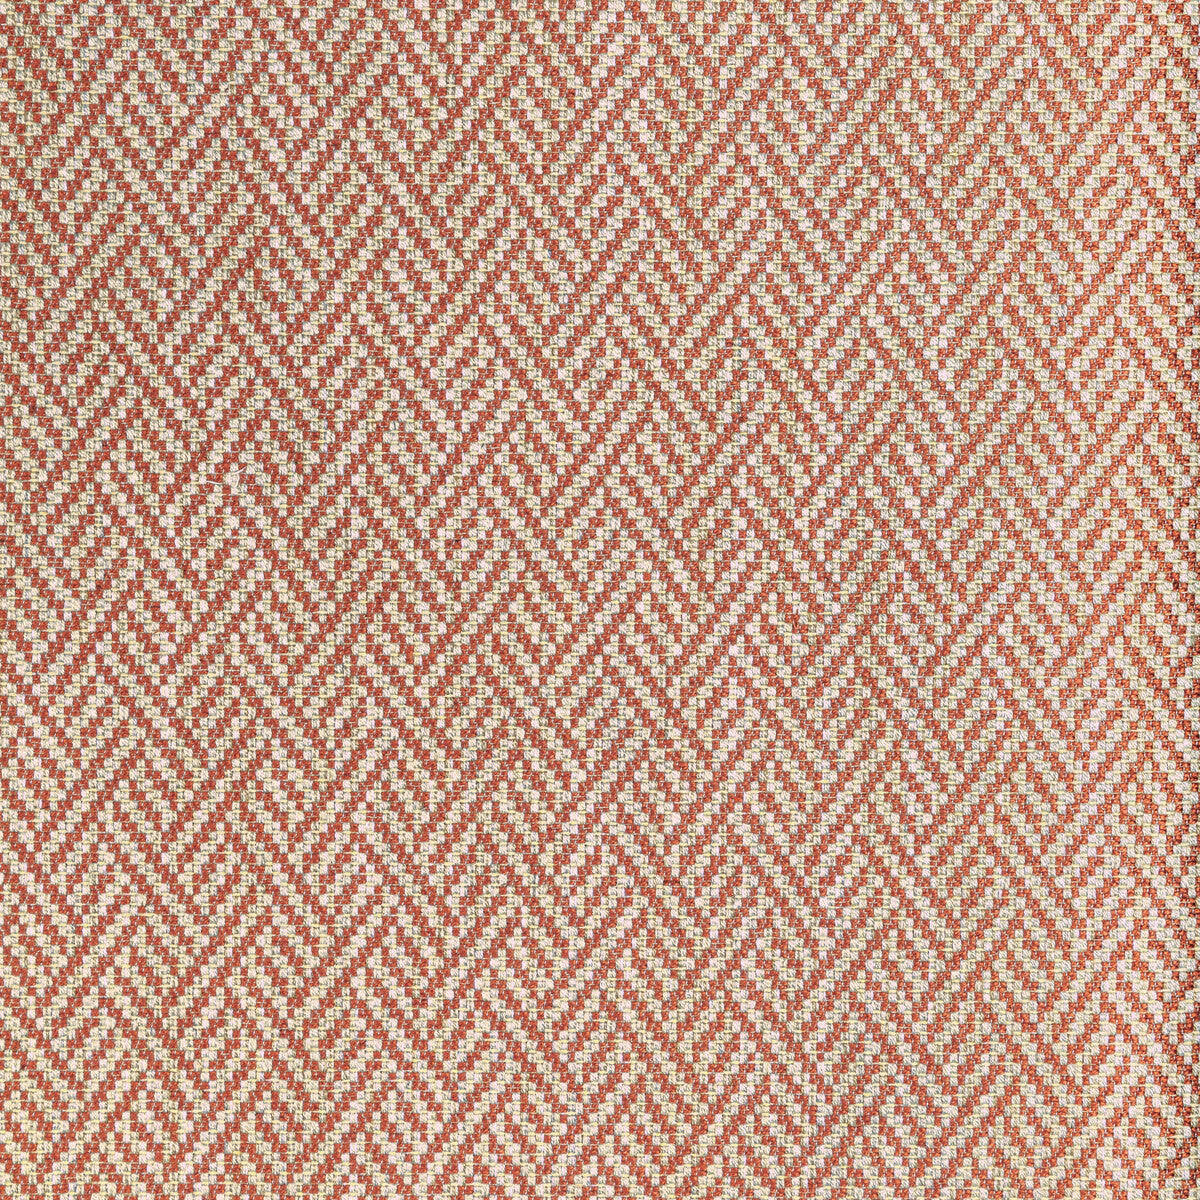 Colbert Weave fabric in spice color - pattern 8022108.12.0 - by Brunschwig &amp; Fils in the Lorient Weaves collection